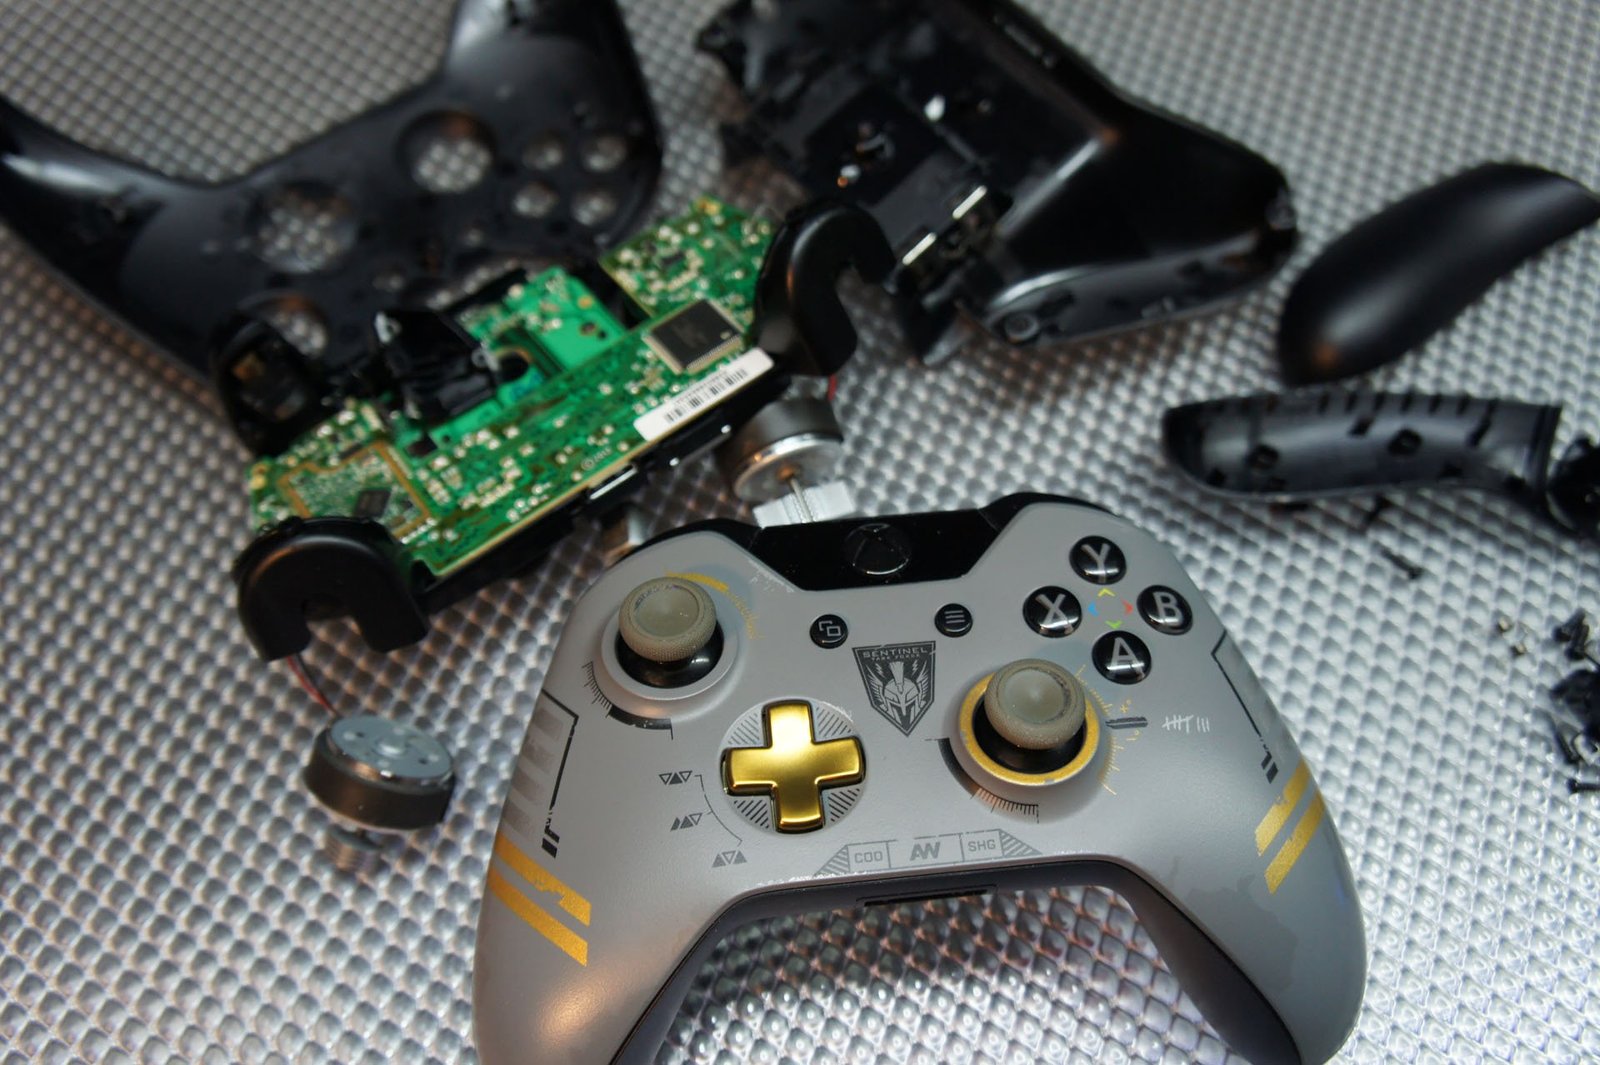 where can i repair my xbox one controller